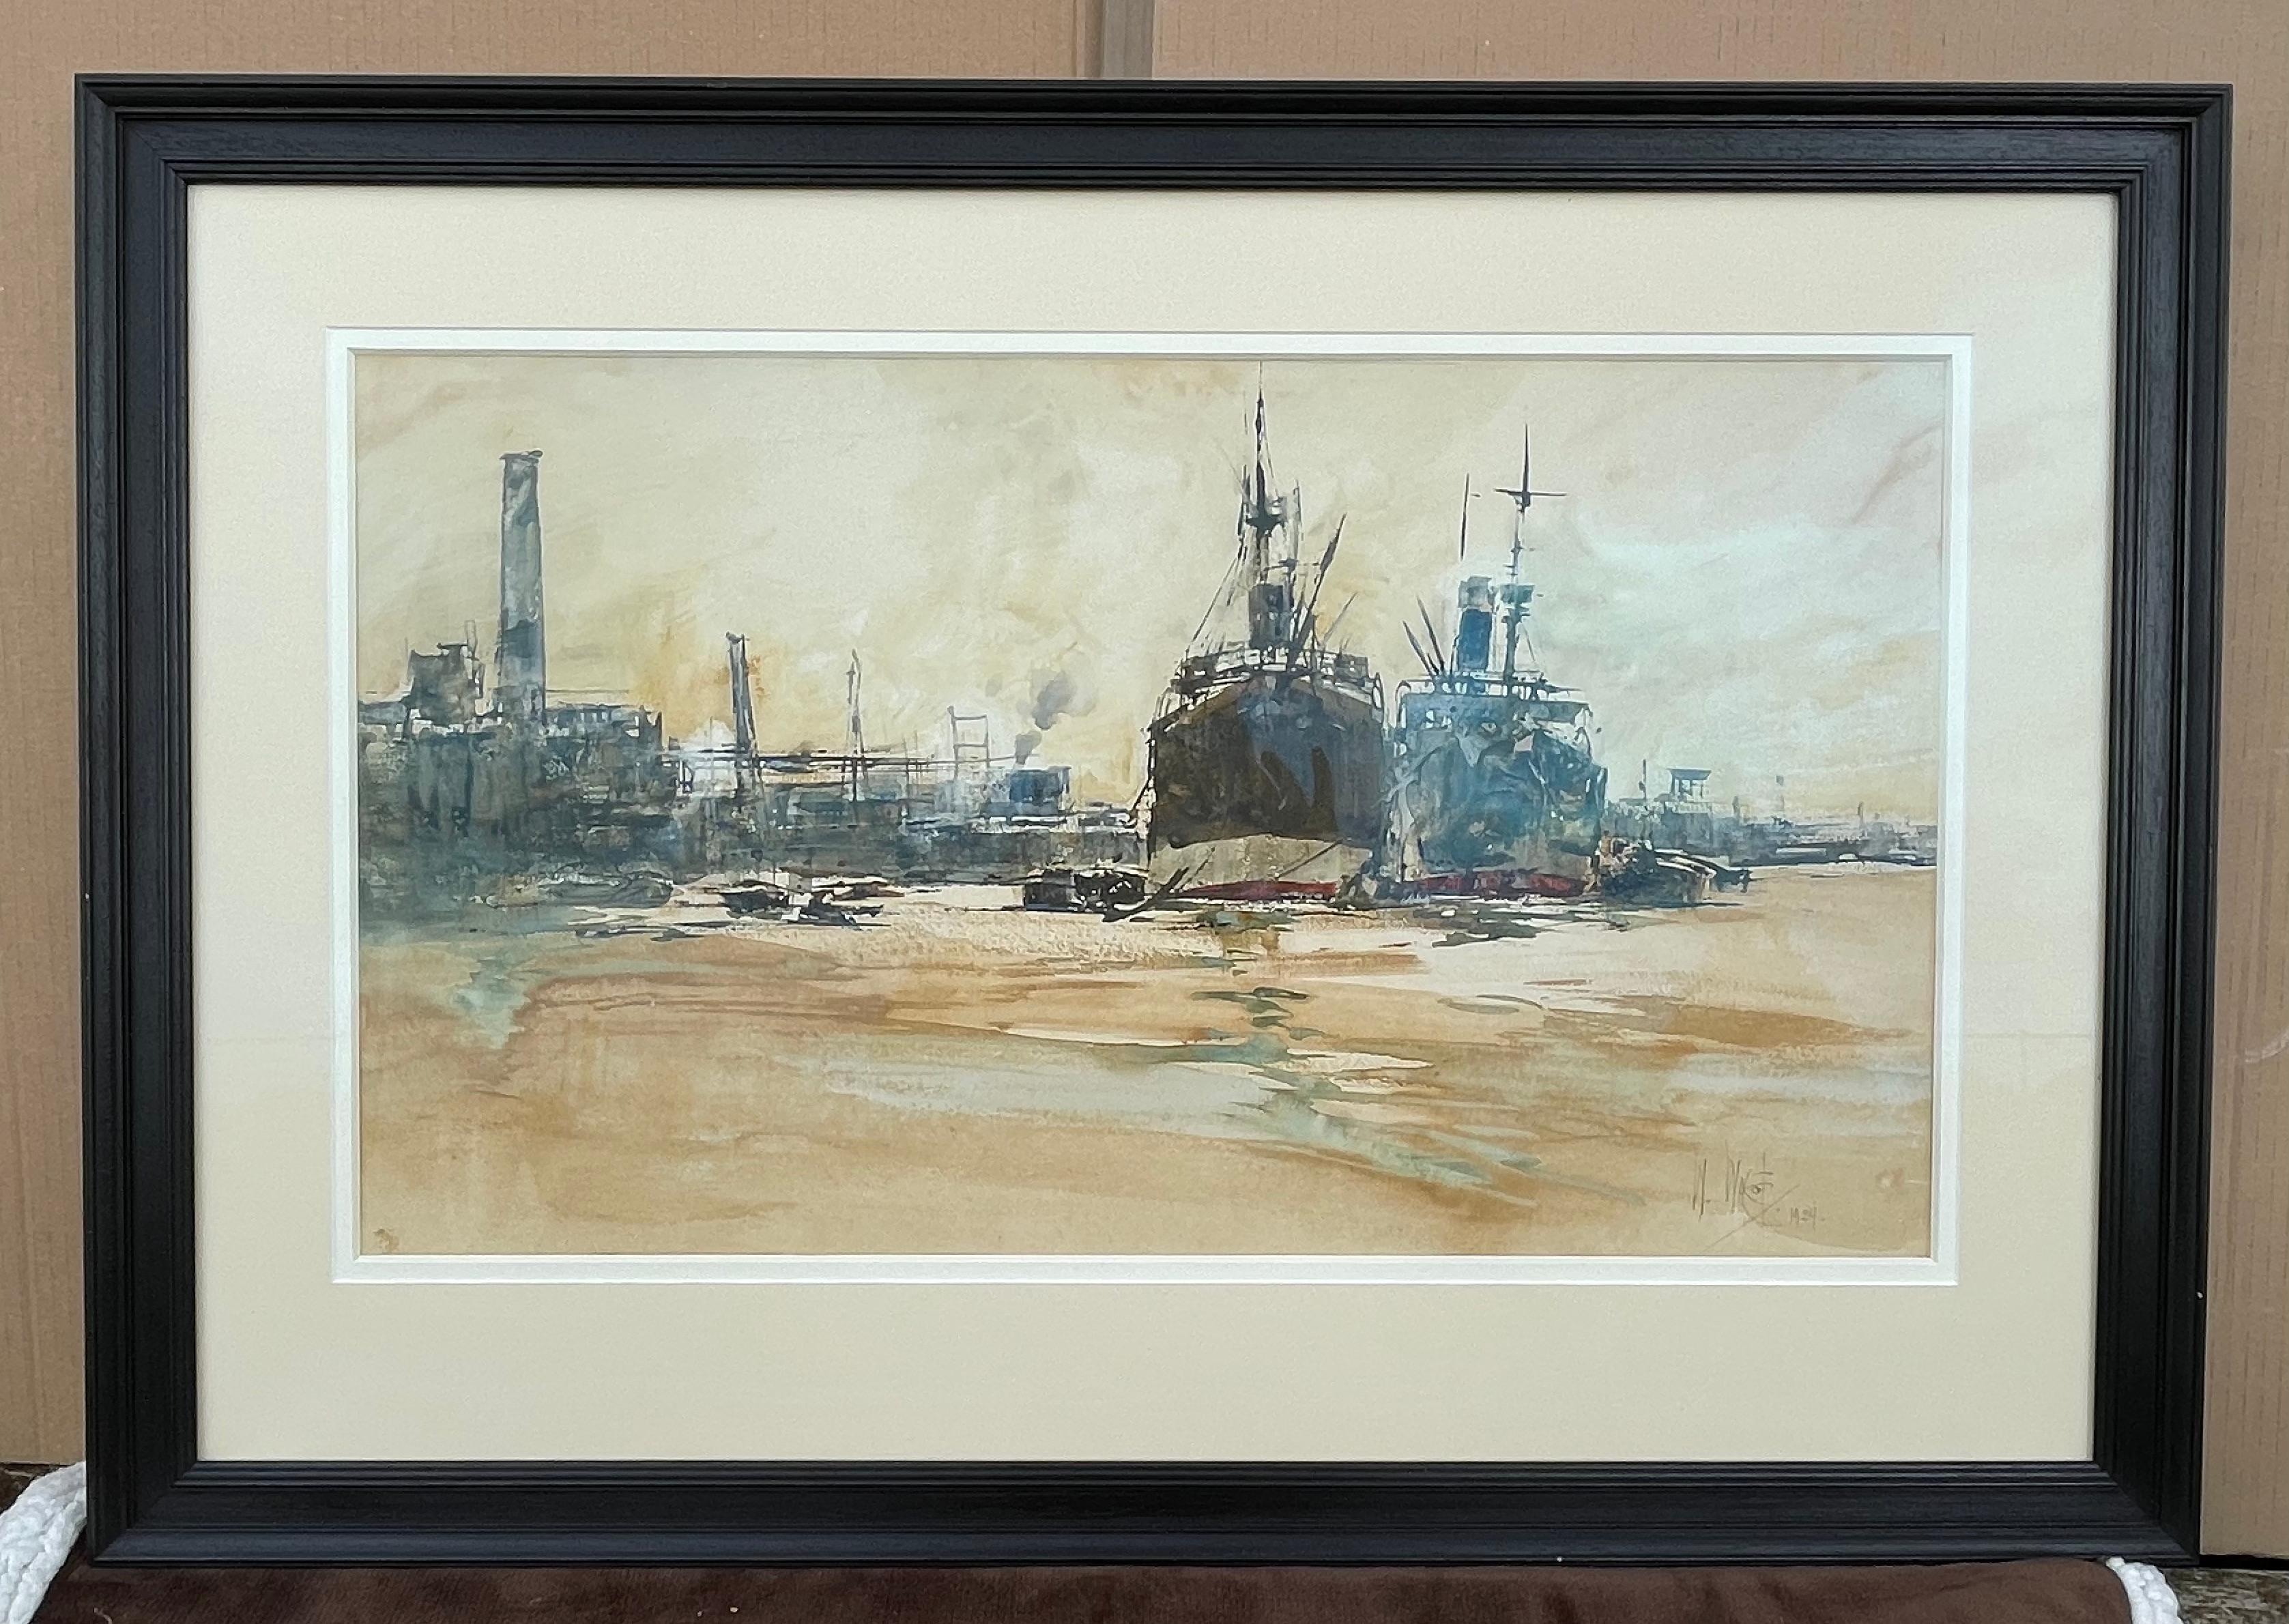 The Pool of London - 20th Century British marine watercolour by William Walcot - Realist Art by William Walcot, R.E., Hon.R.I.B.A.